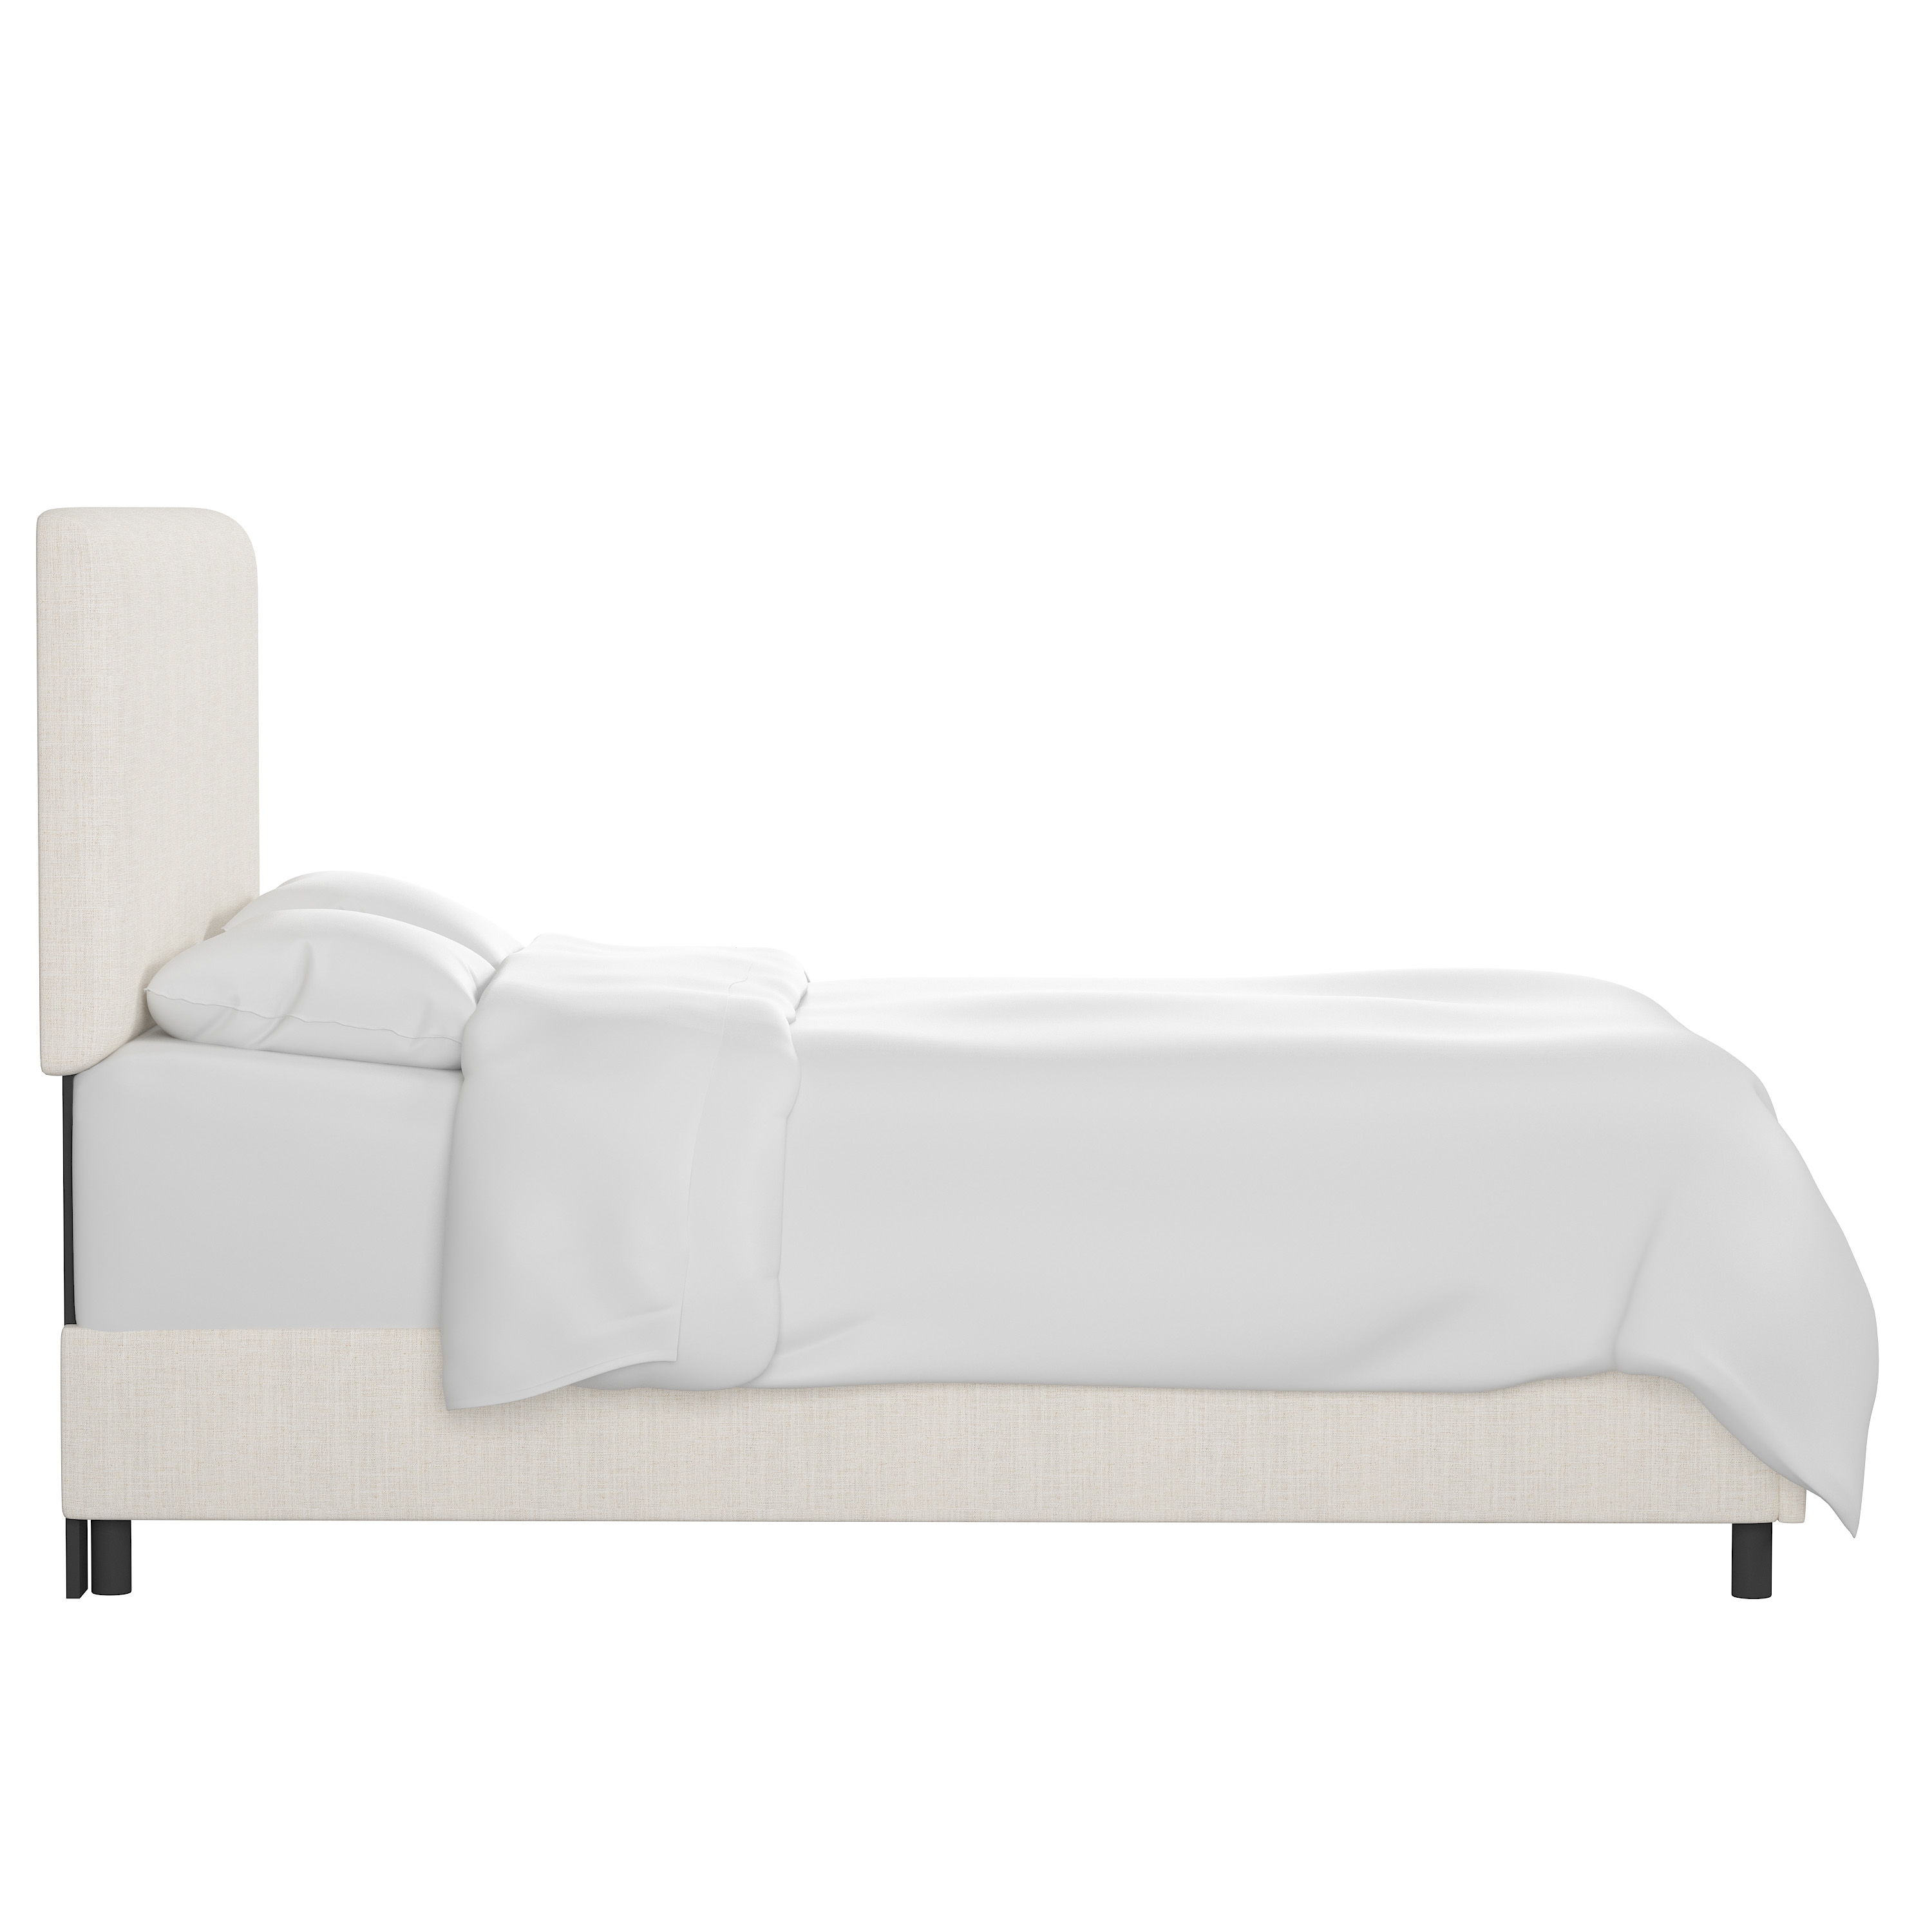 California King Sawyer Bed in Linen Talc - Image 2